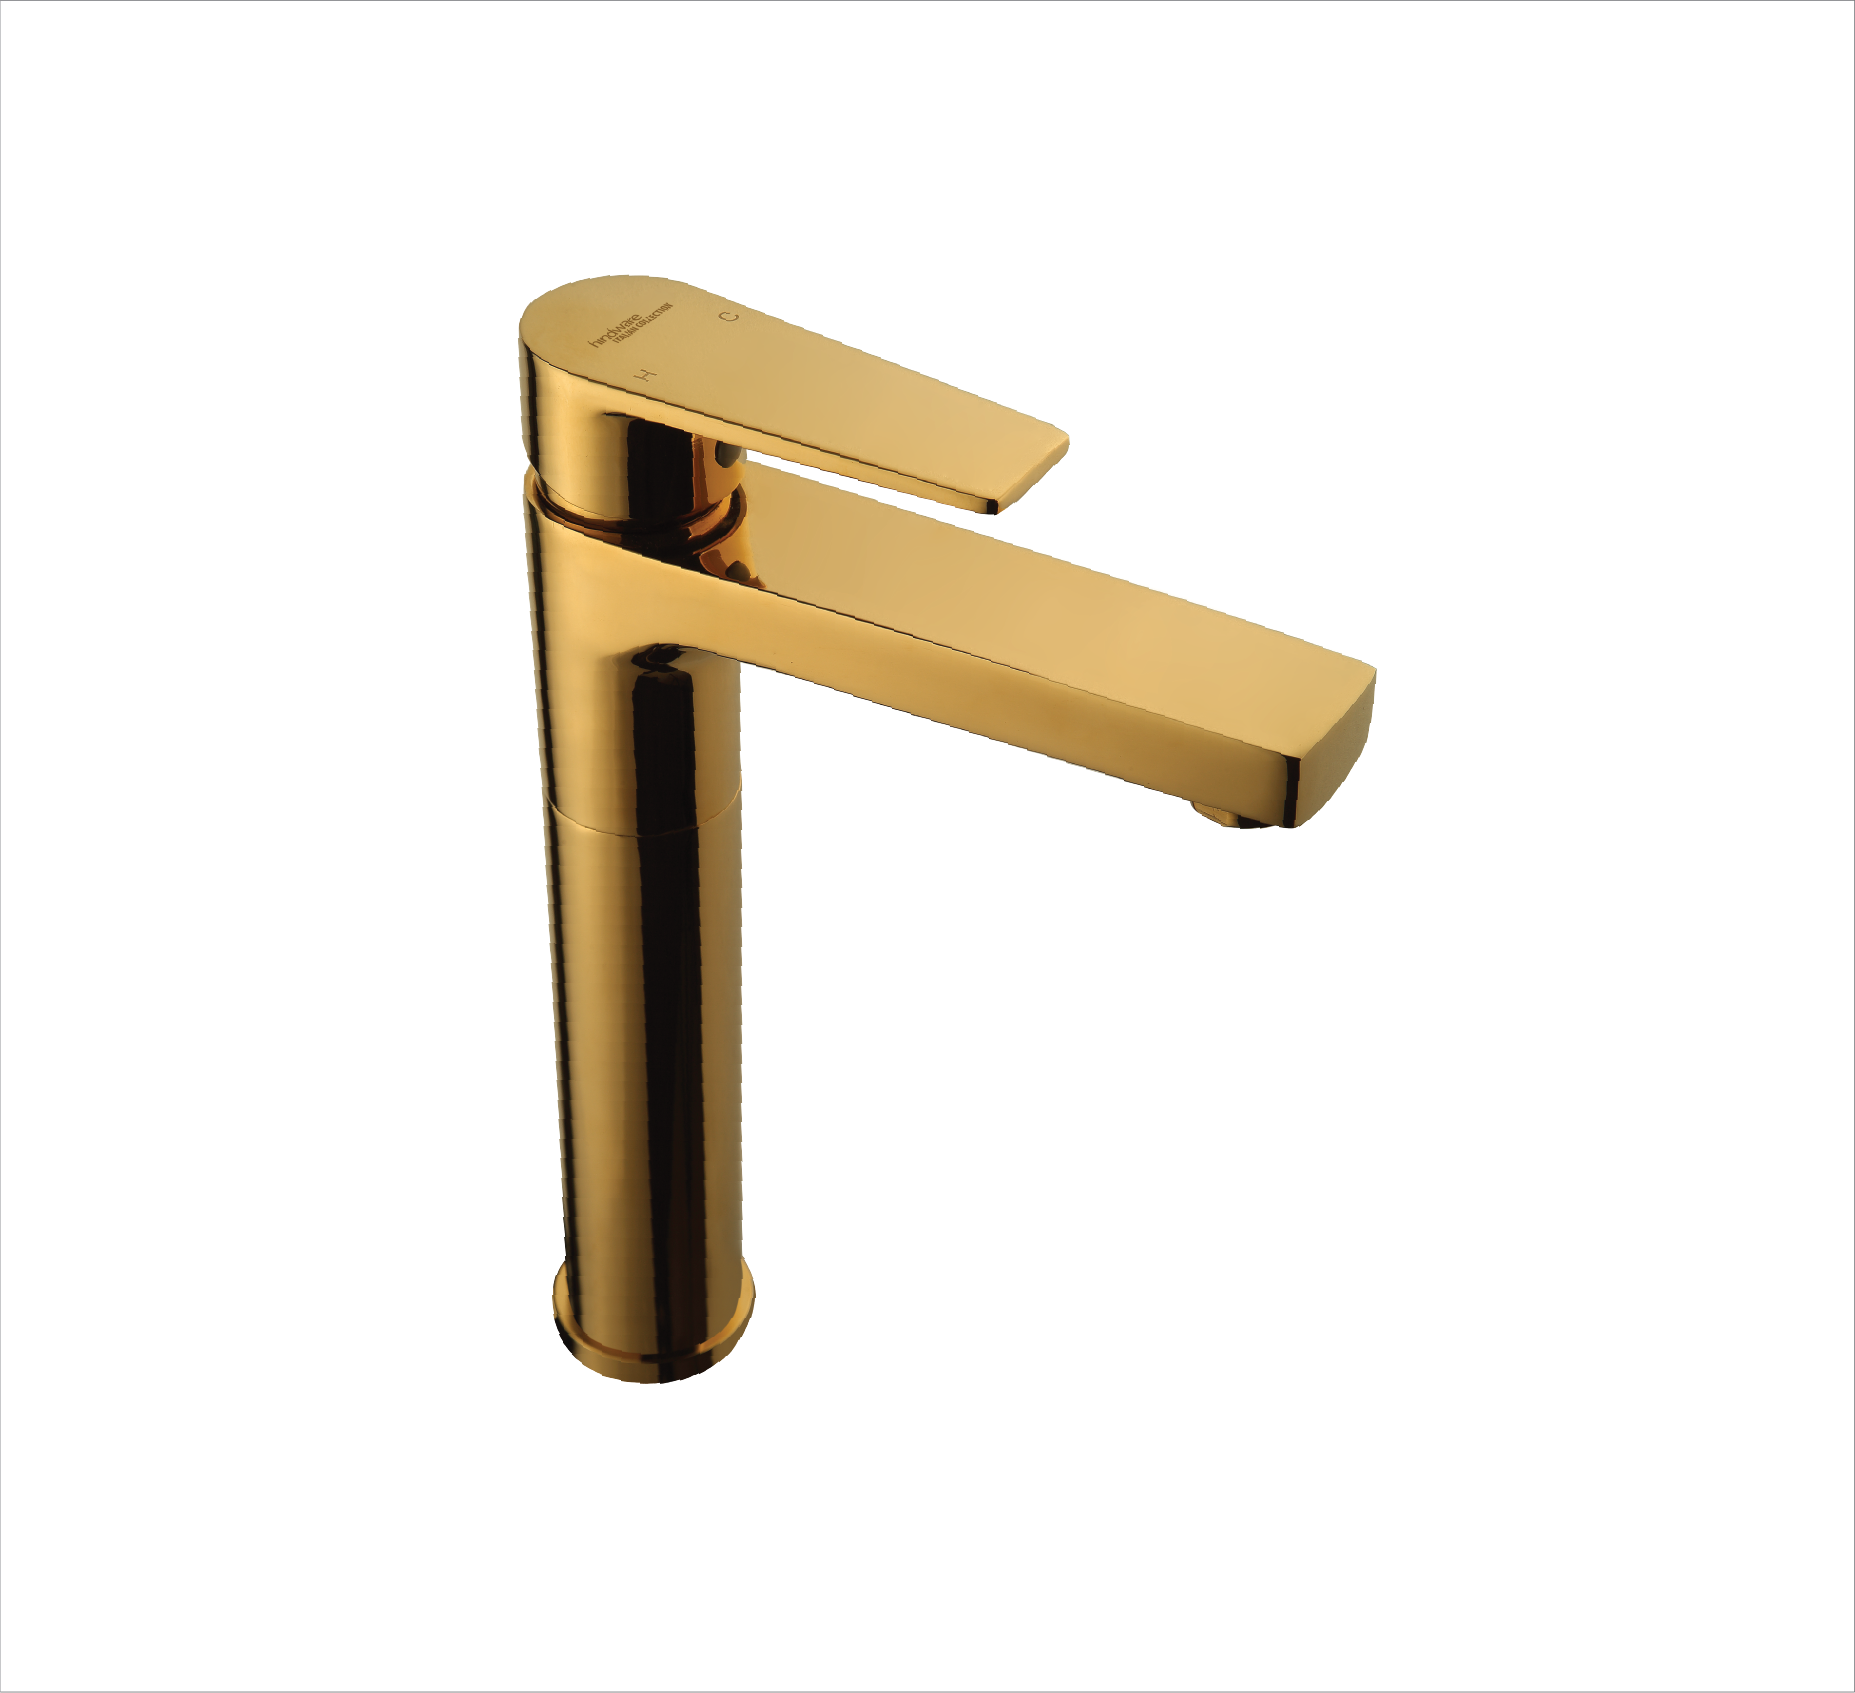 ELEMENT SINGLE LEVER BASIN MIXER TALL TAP W/O POPUP WASTE IN GOLD